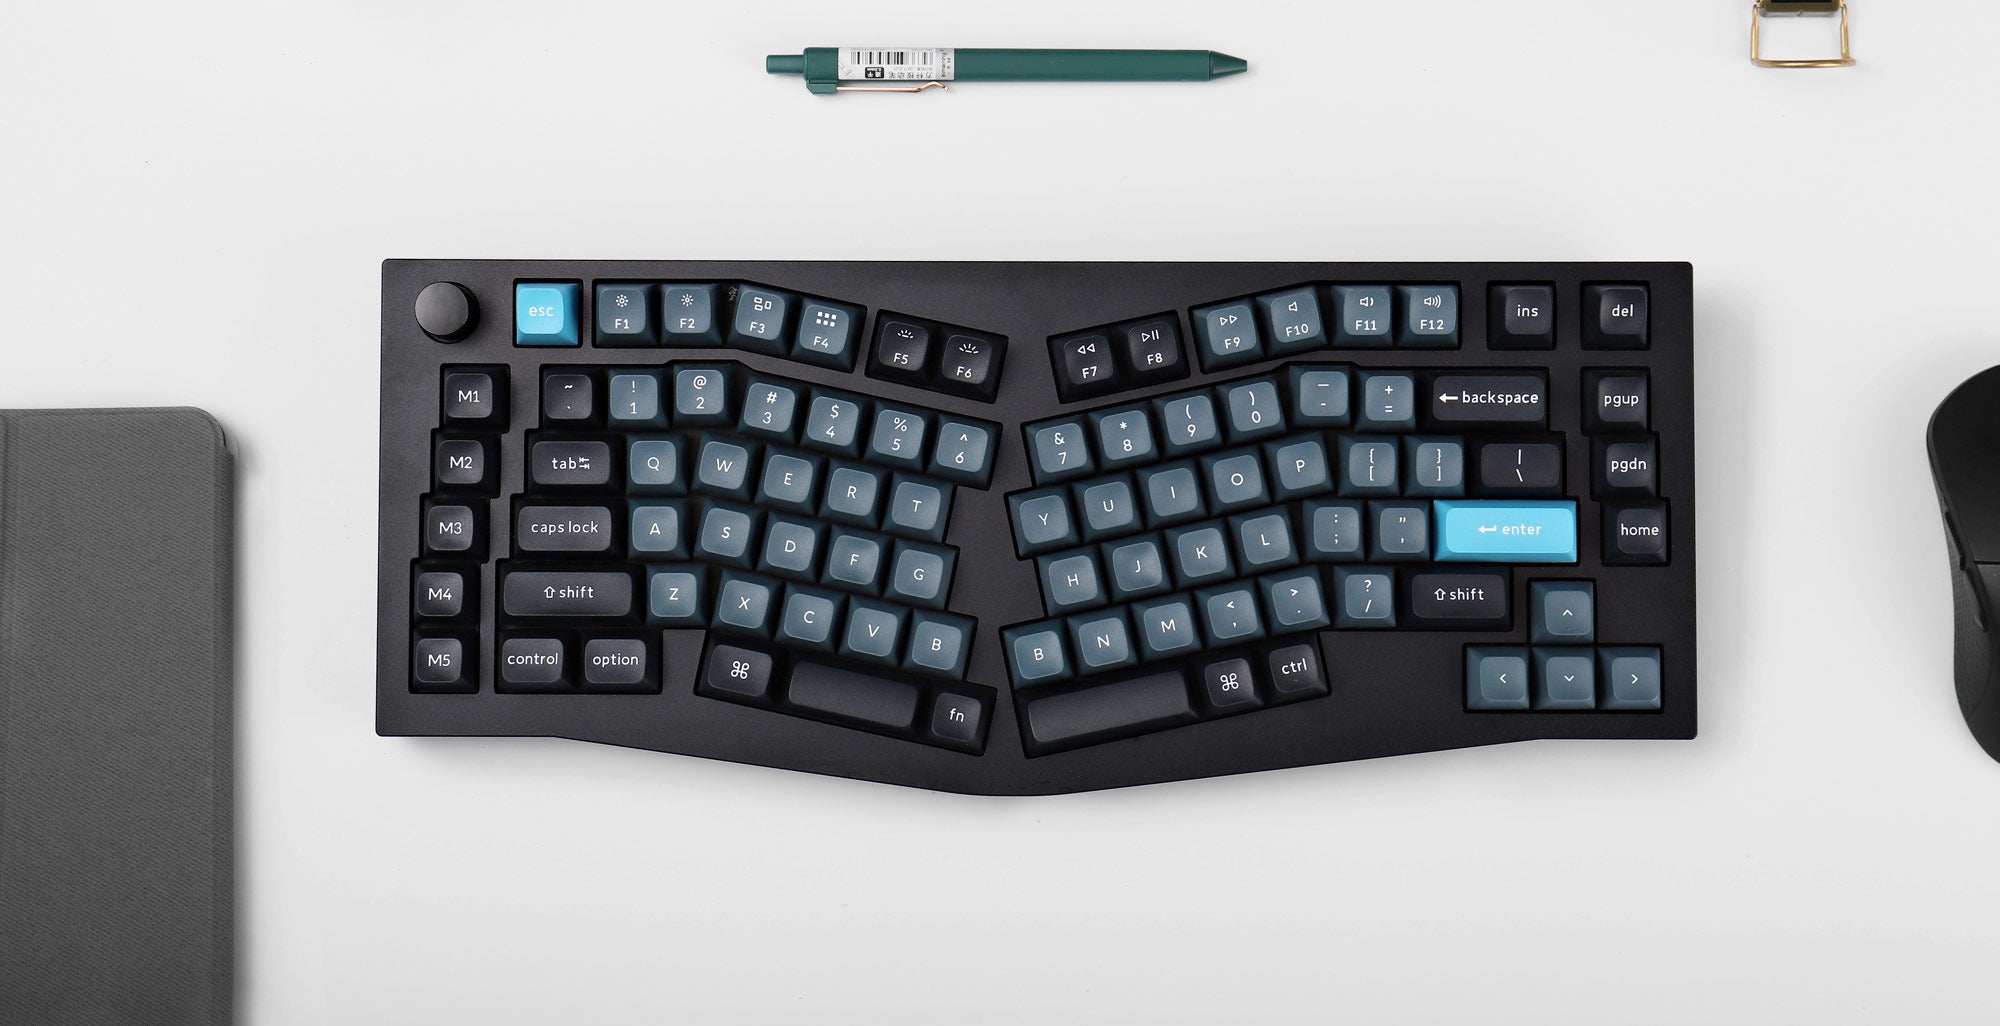 An epic core of the Keychron Q10 Pro